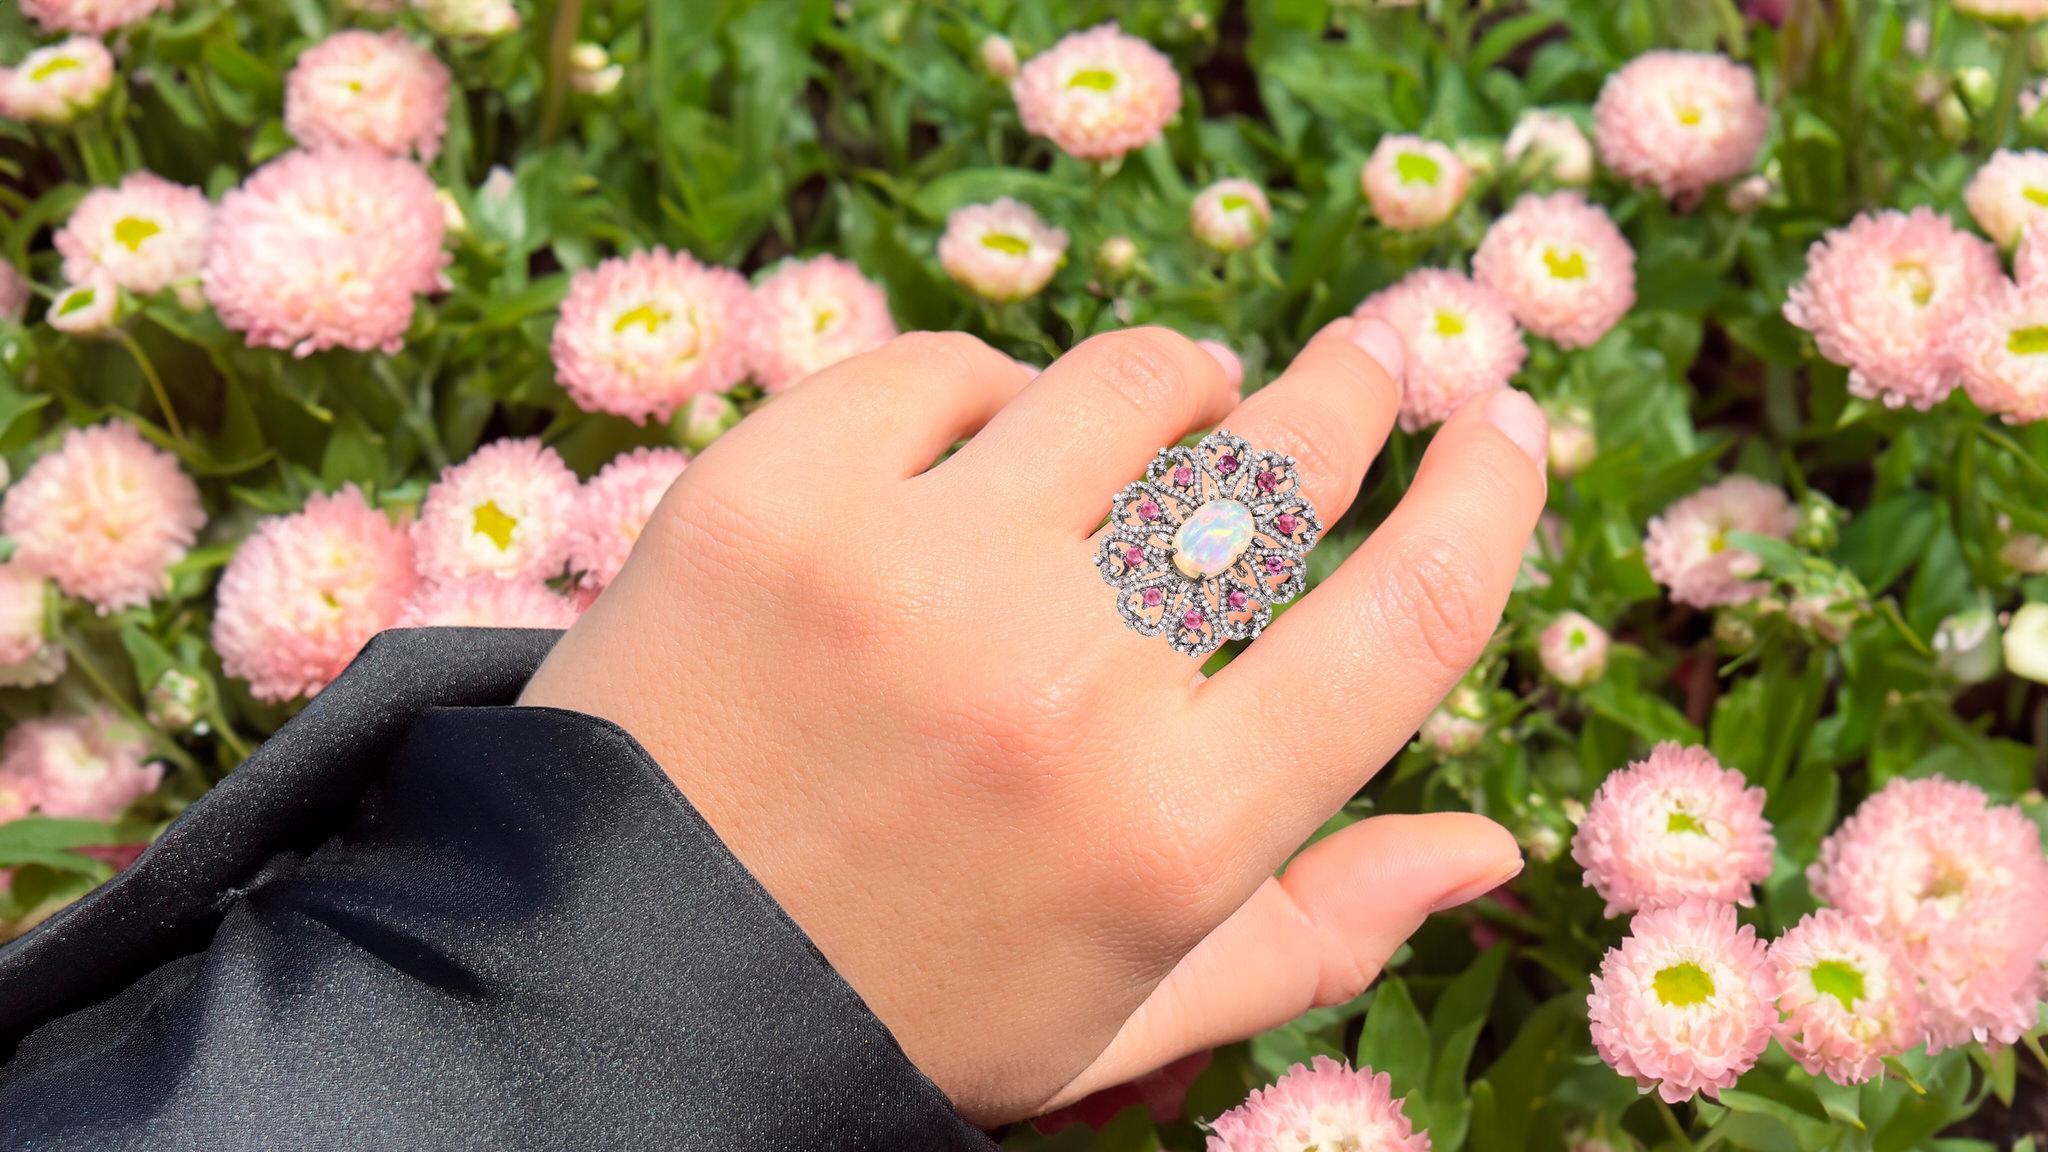 It comes with the Gemological Appraisal by GIA GG/AJP
All Gemstones are Natural
Gemstones: Opal, Pink Tourmalines, Diamonds
Total Carat Weight: 7.90 Carats
Metal: Rhodium Plated Sterling Silver
Ring Size: 7.5* US
*It can be resized complimentary